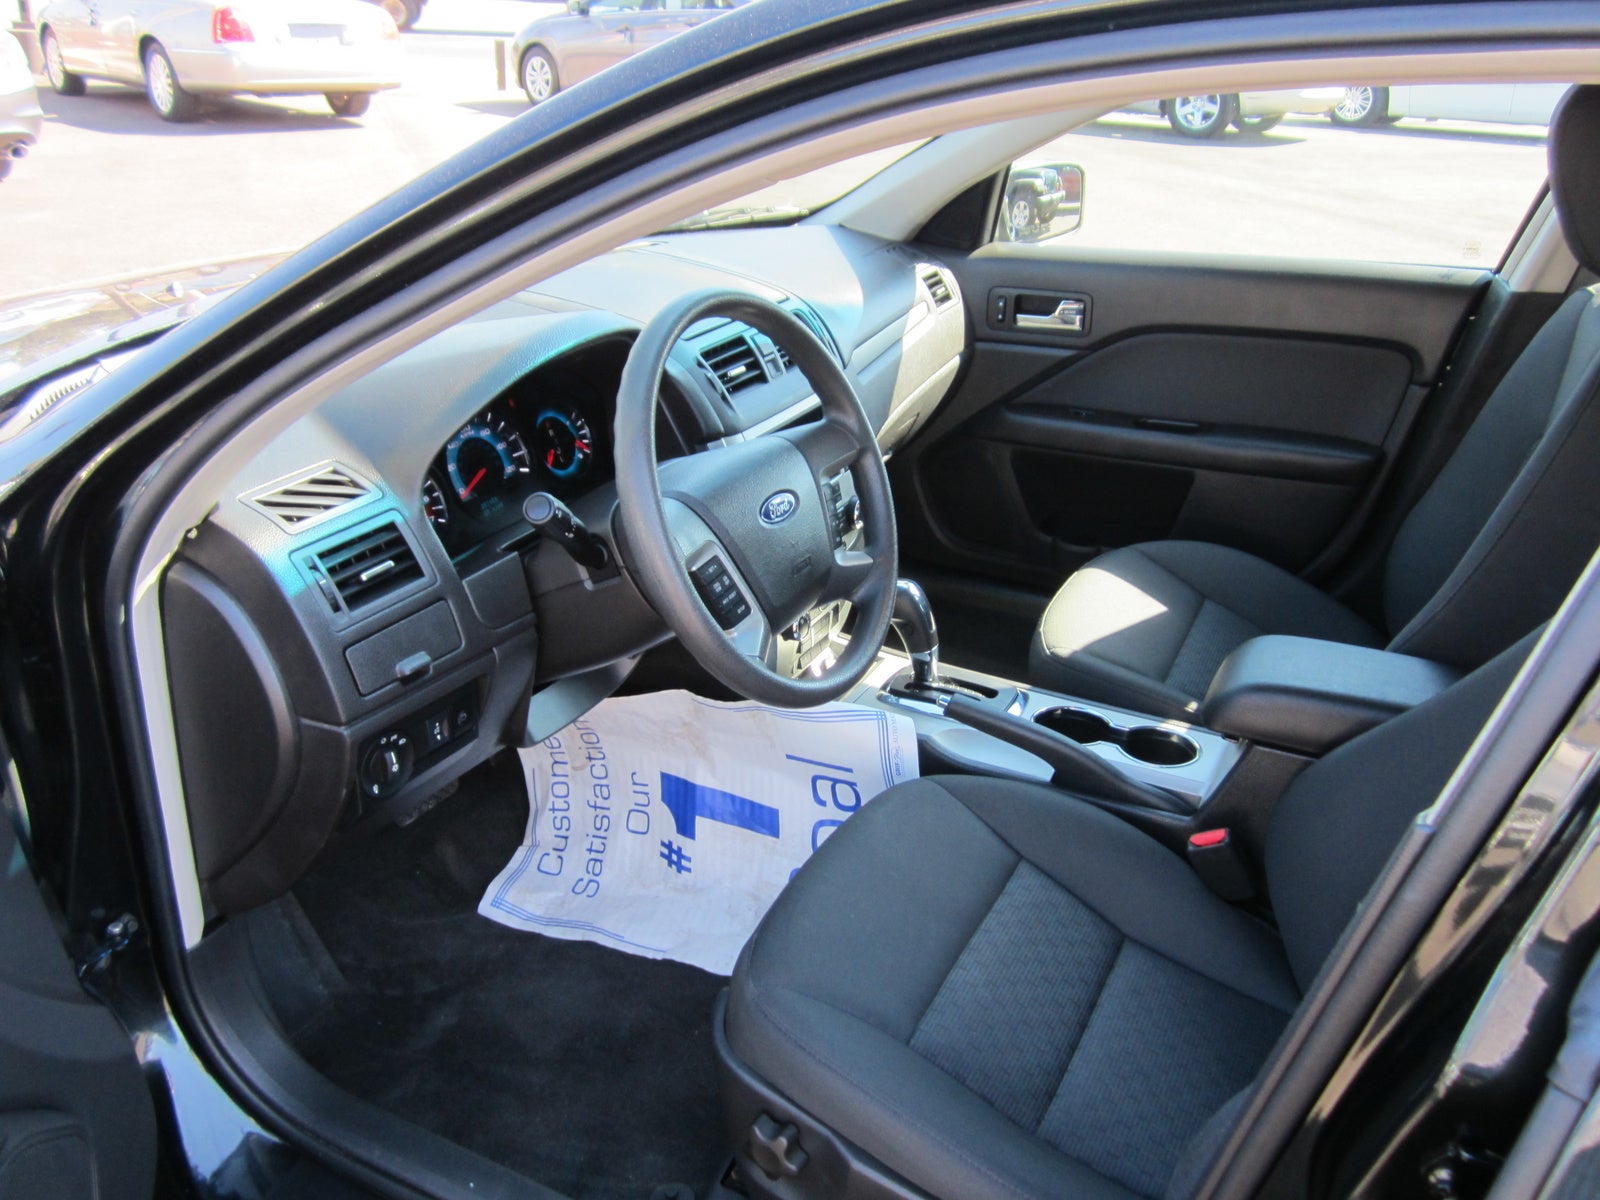 2010 Ford fusion sync system #8